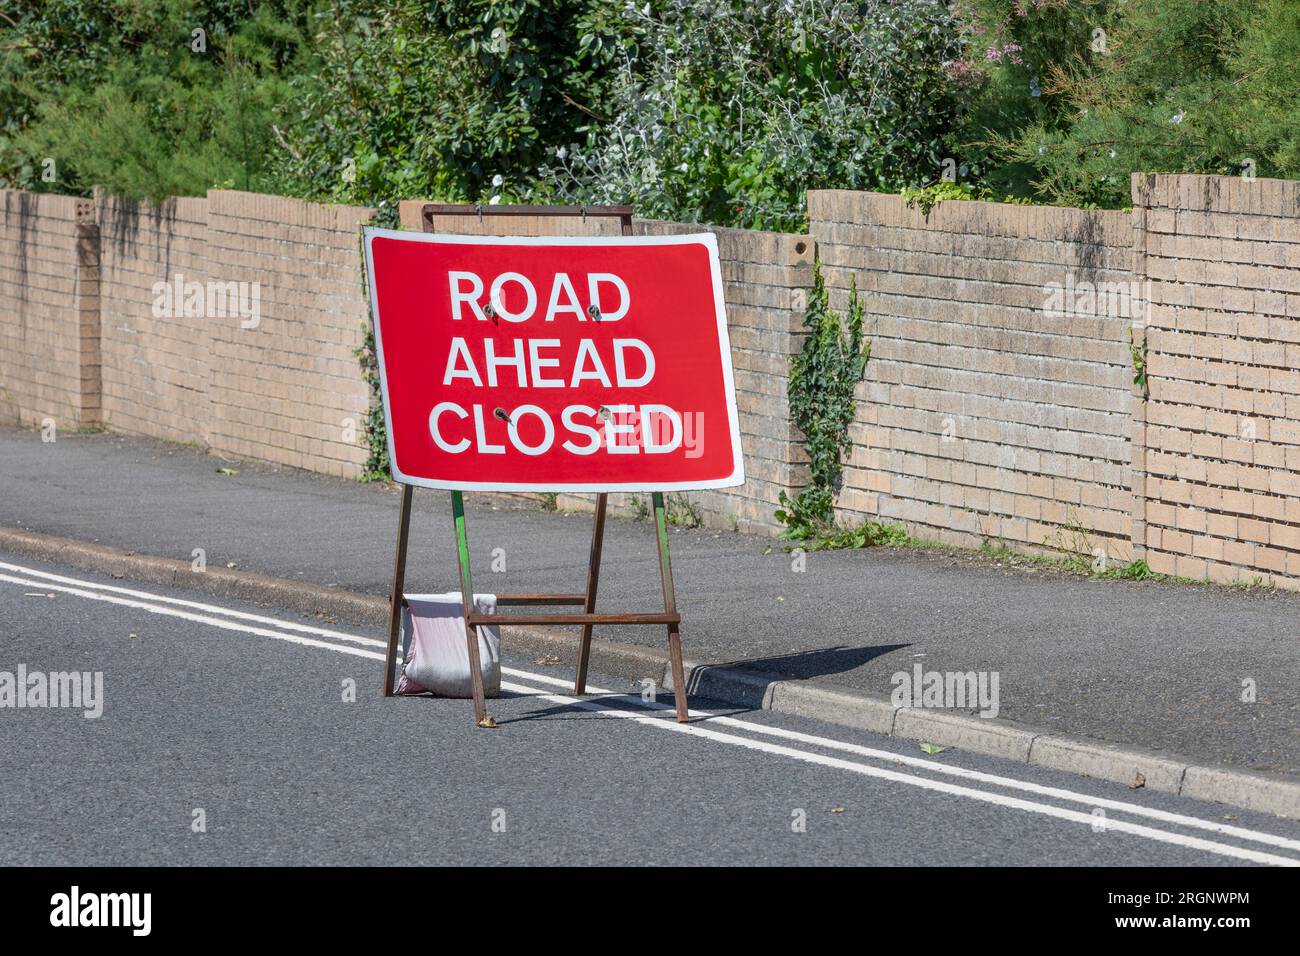 A red and white road ahead closed sign Stock Photo